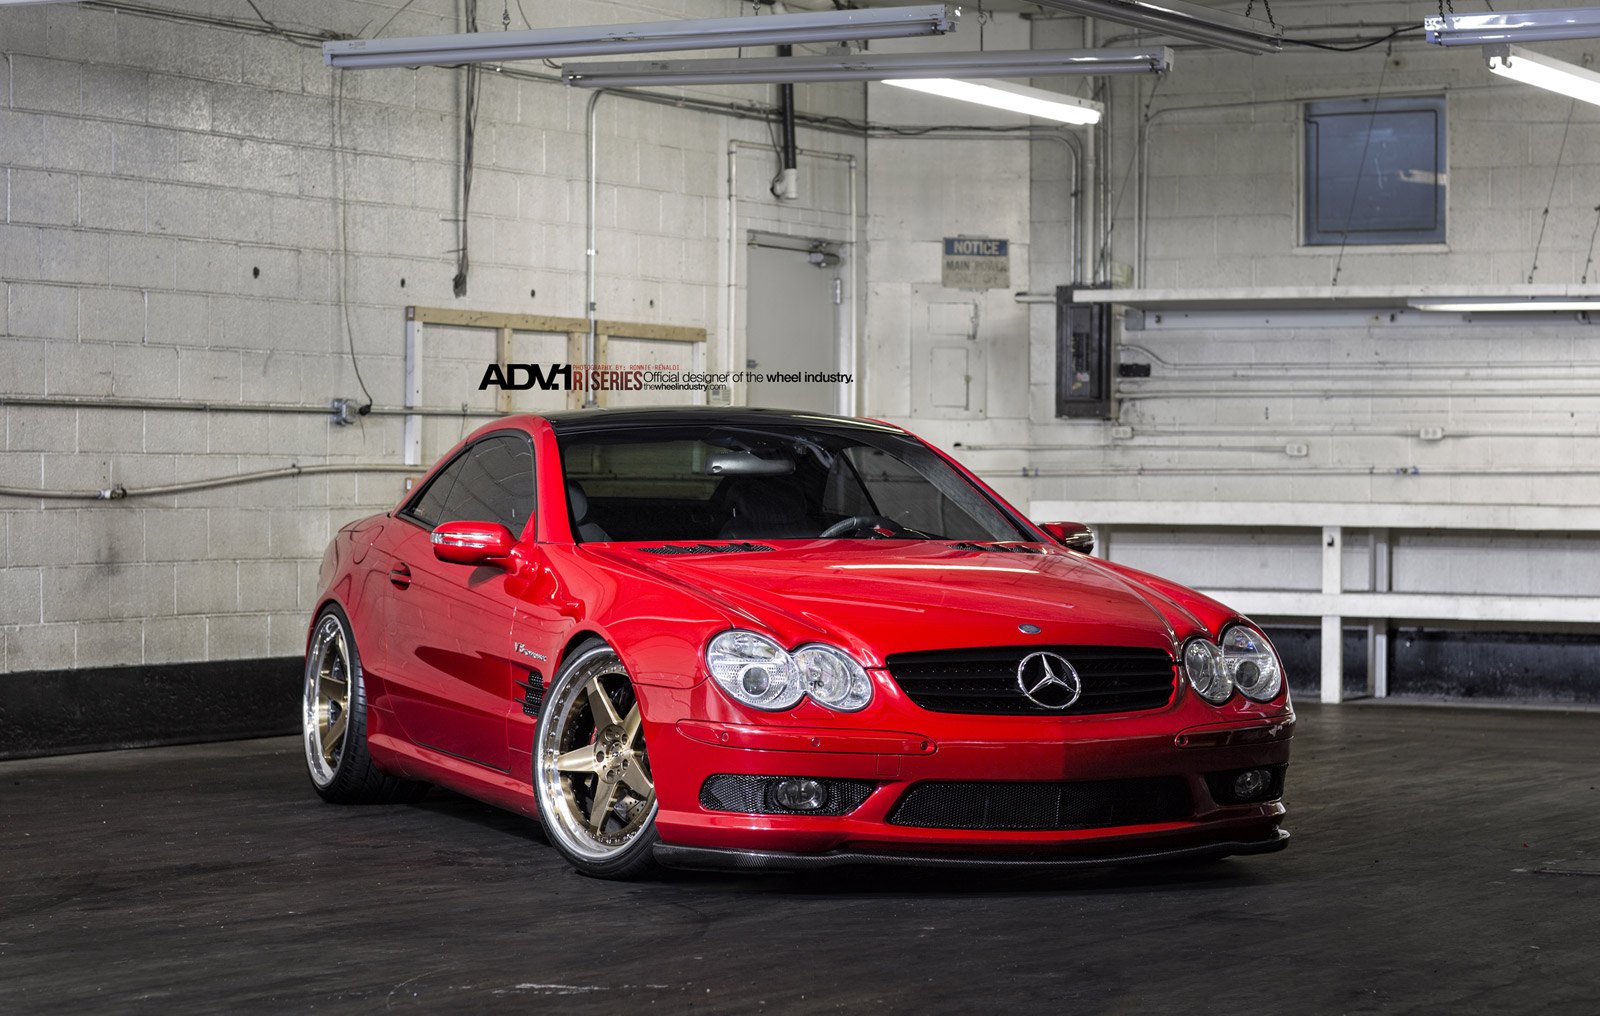 Carbon Fiber Front Lip on Red Mercedes S Class - Photo by ADV.1